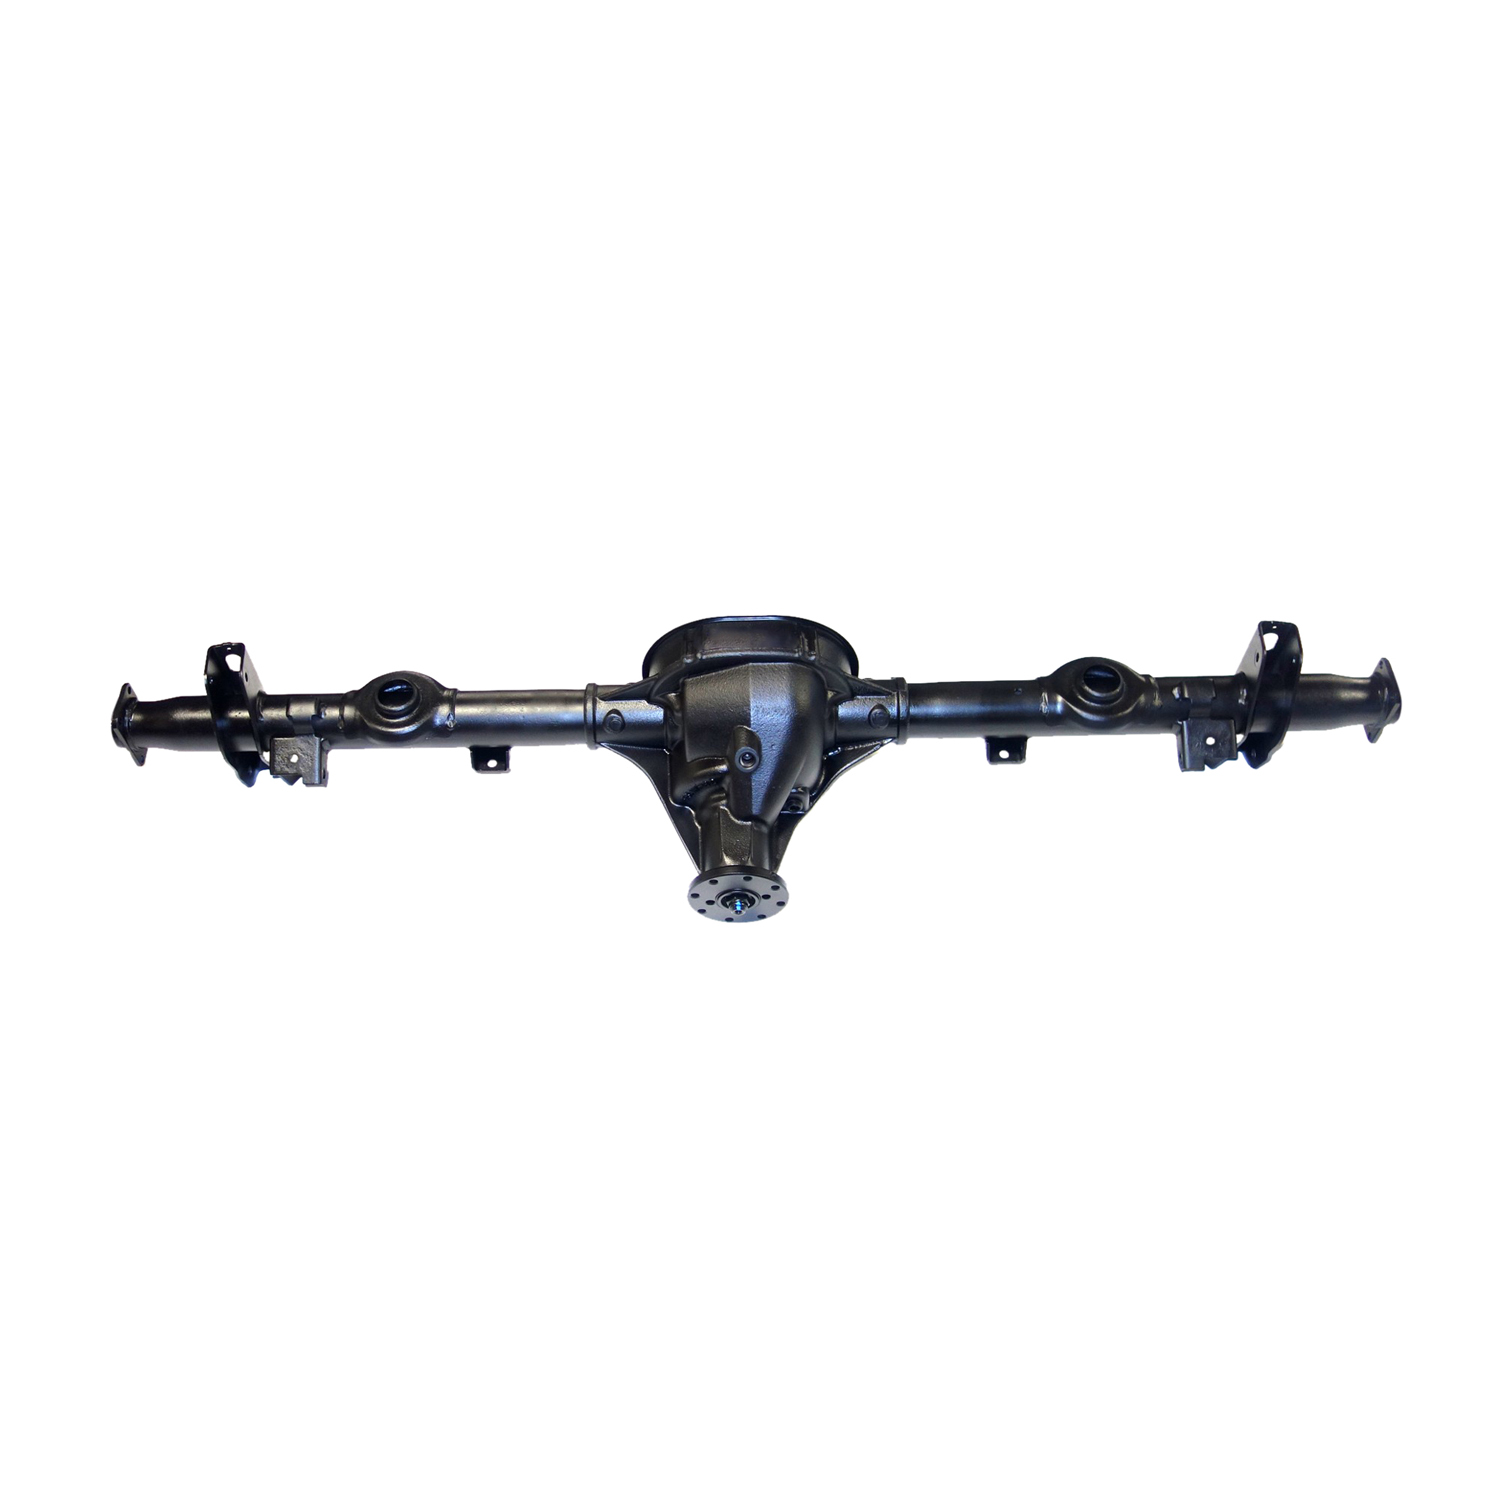 Remanufactured Axle Assy 8.8" 01-02 Crown Vic, W/O ABS W/O H&ling Package, 3.27 Posi